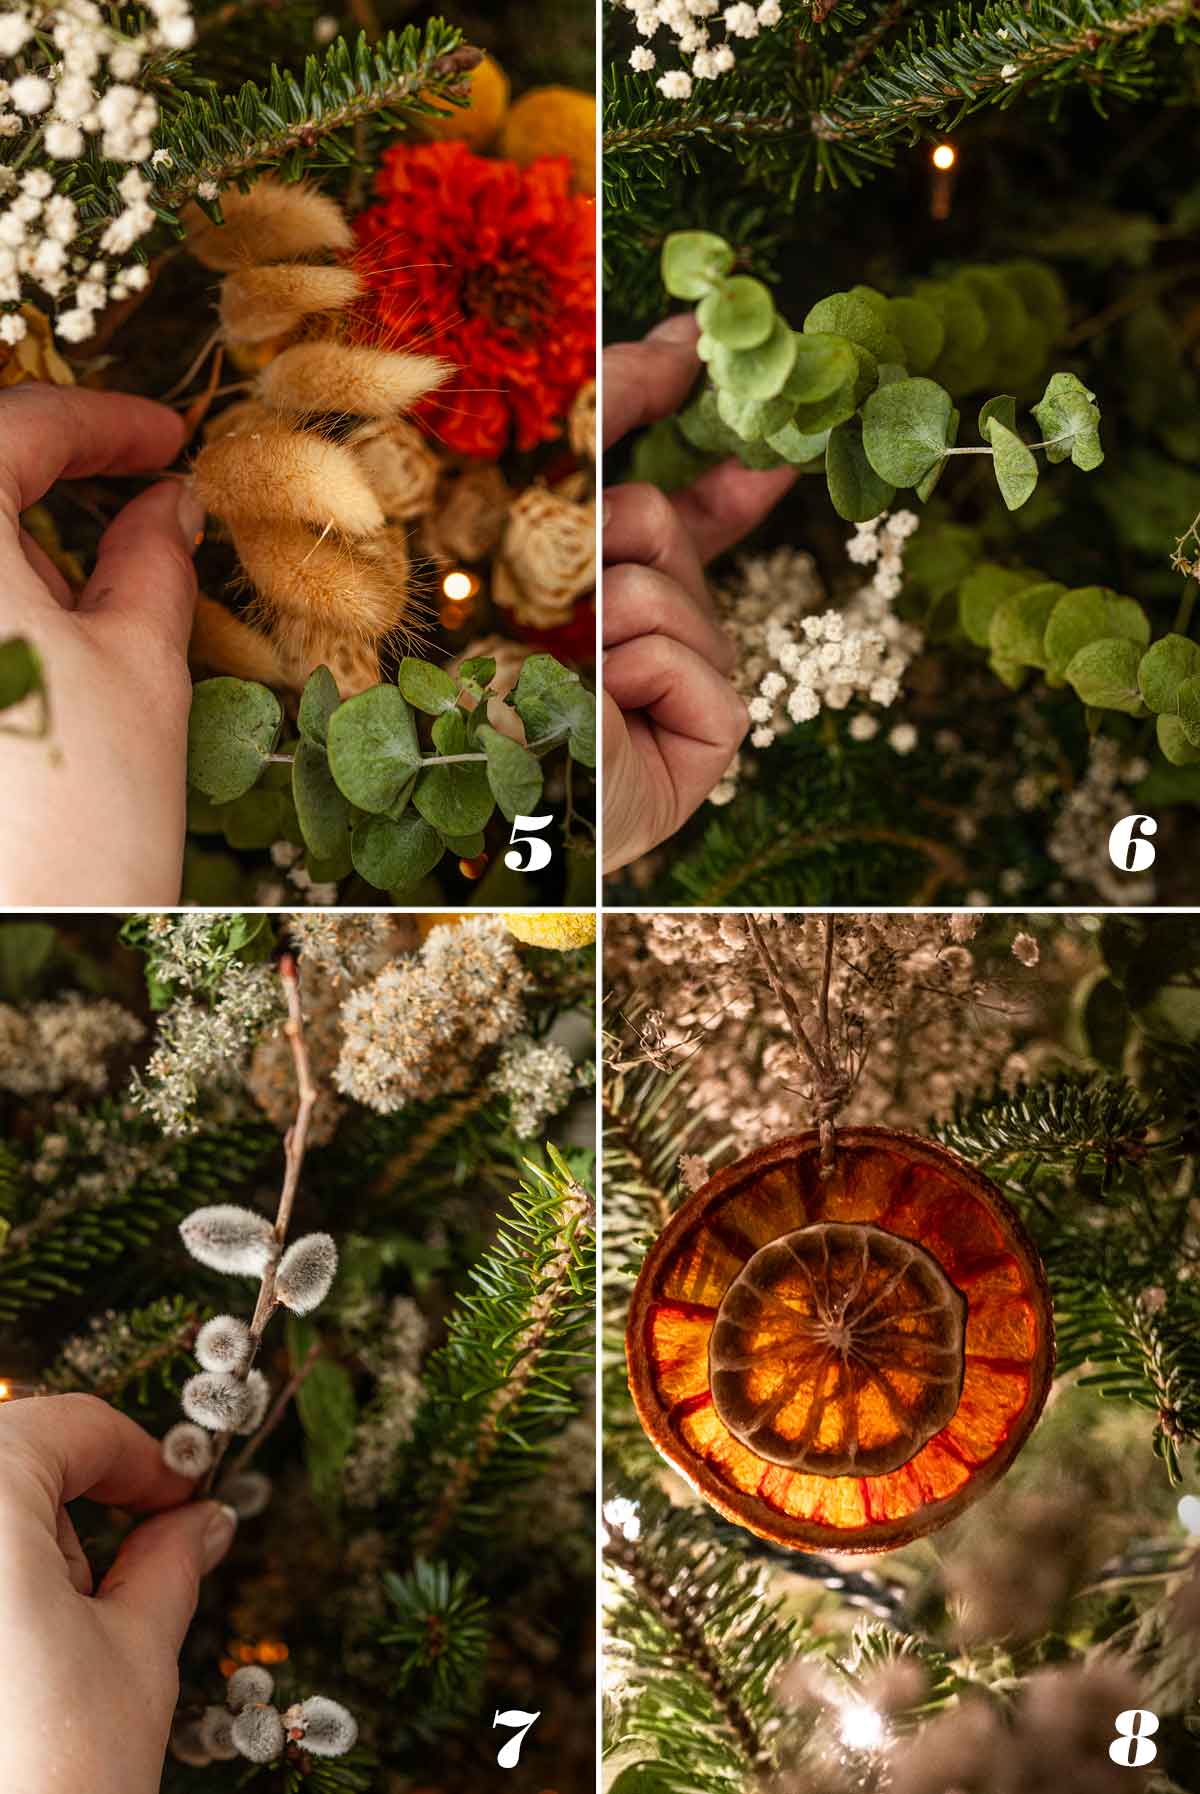 A collage of 4 numbered images showing how to decorate a Christmas tree wit natural touches.